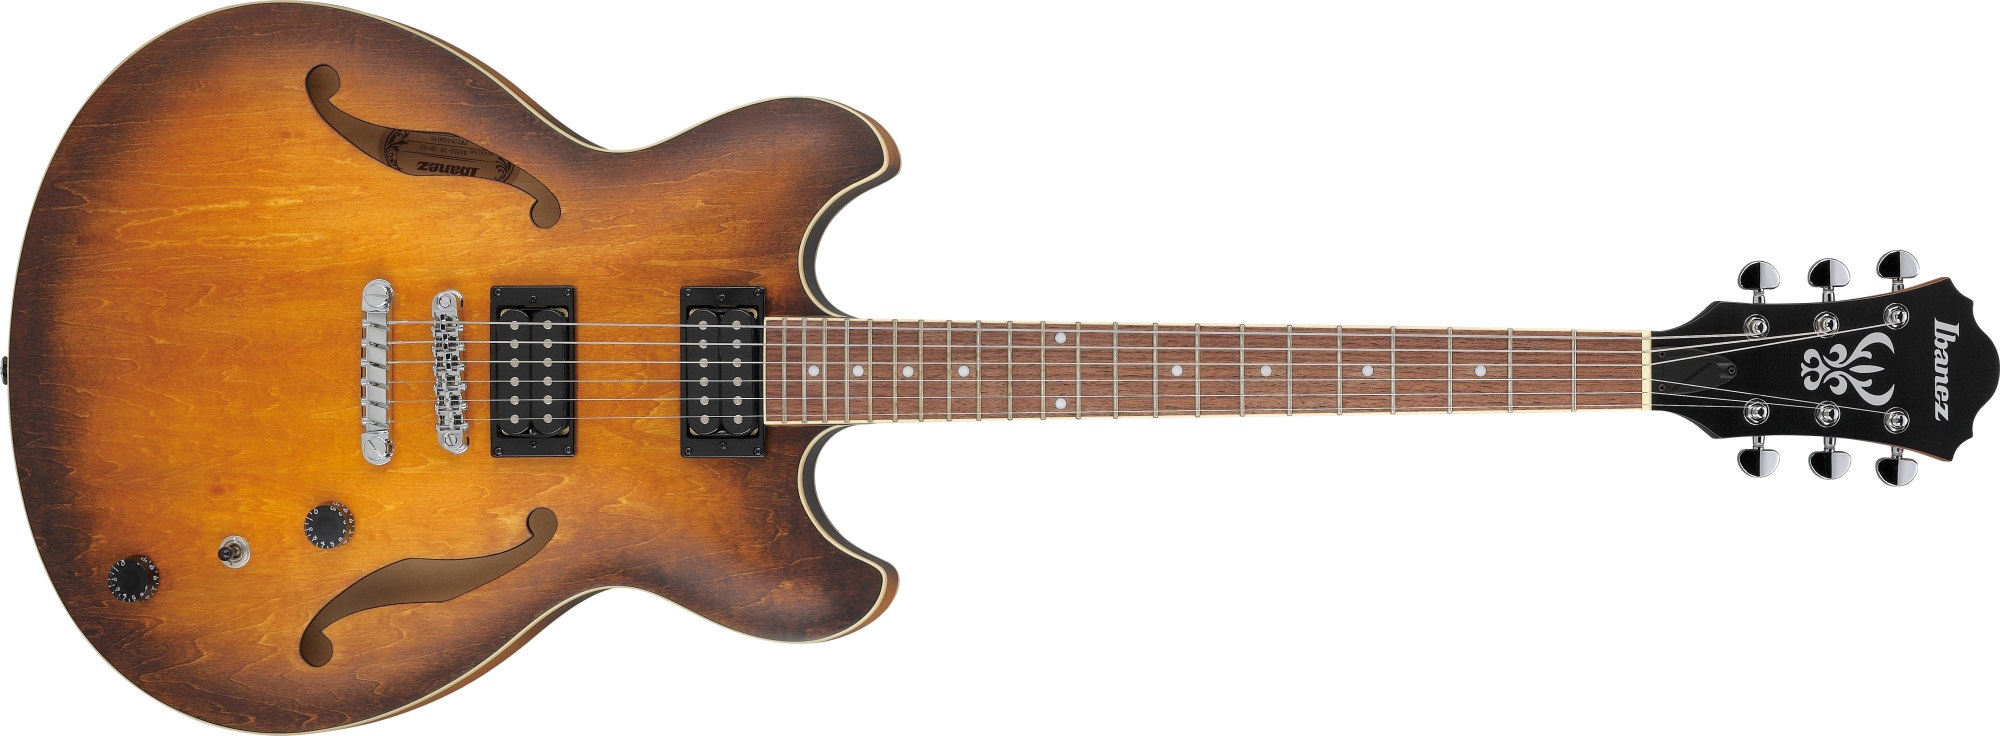 Ibanez AS 53 TF